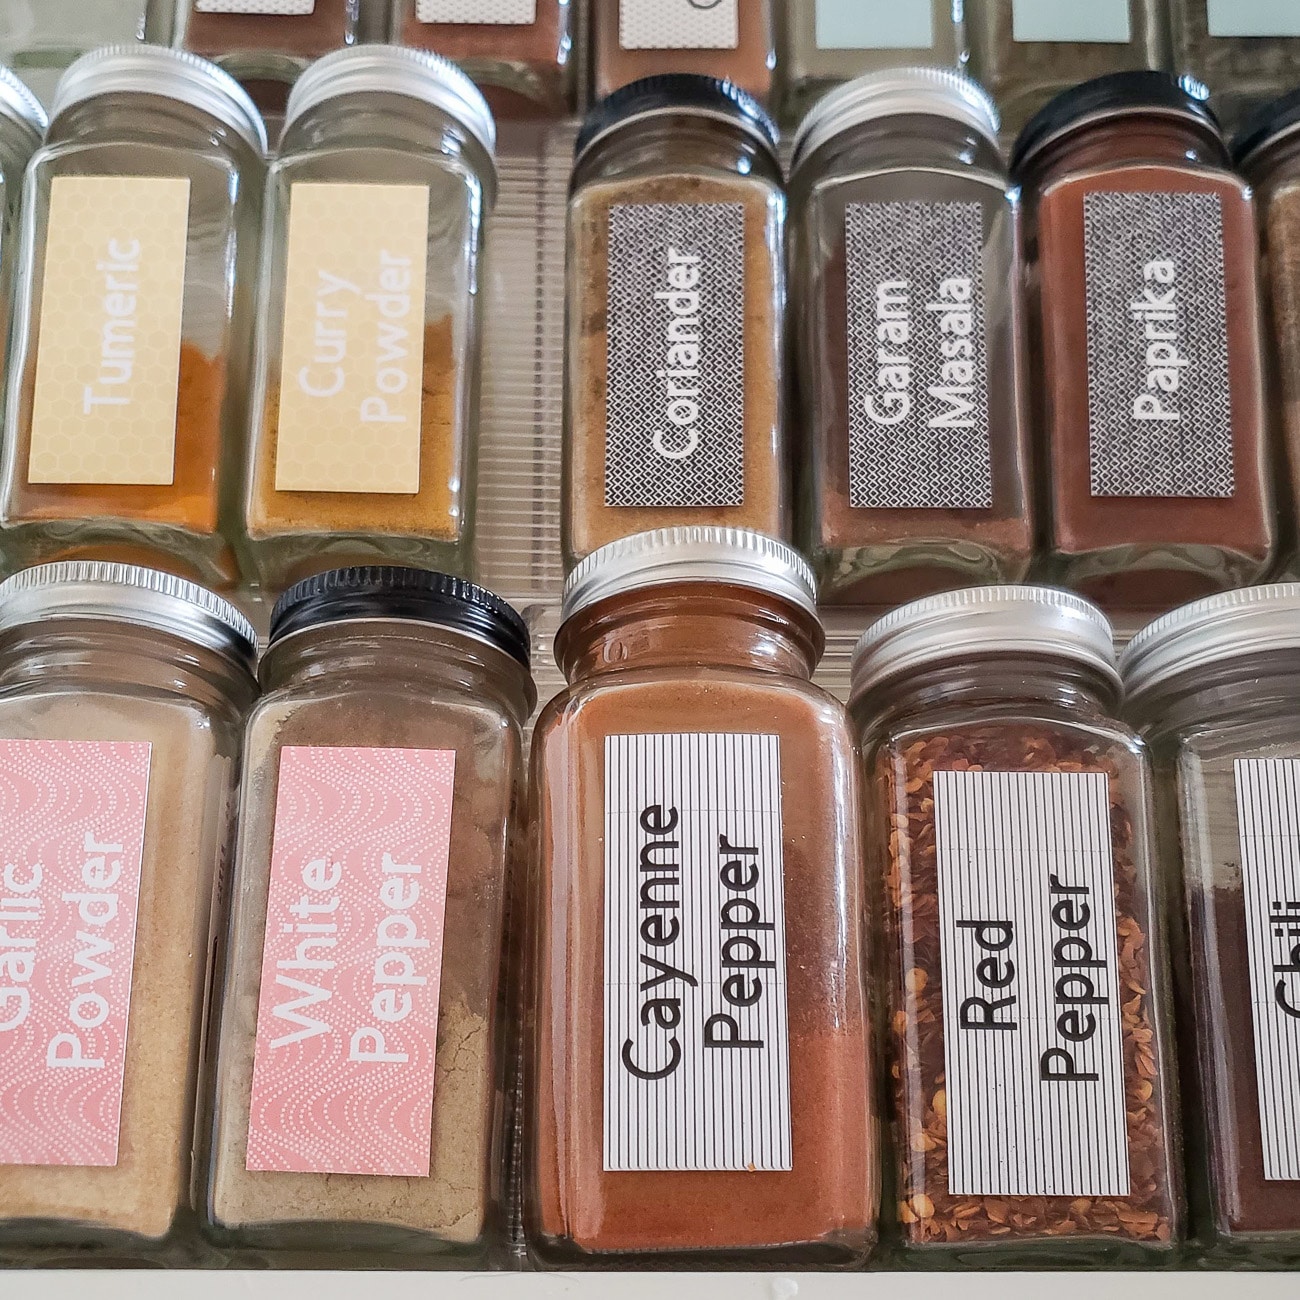 Pretty Glass Spice Jar Labels - How to Organize Spices